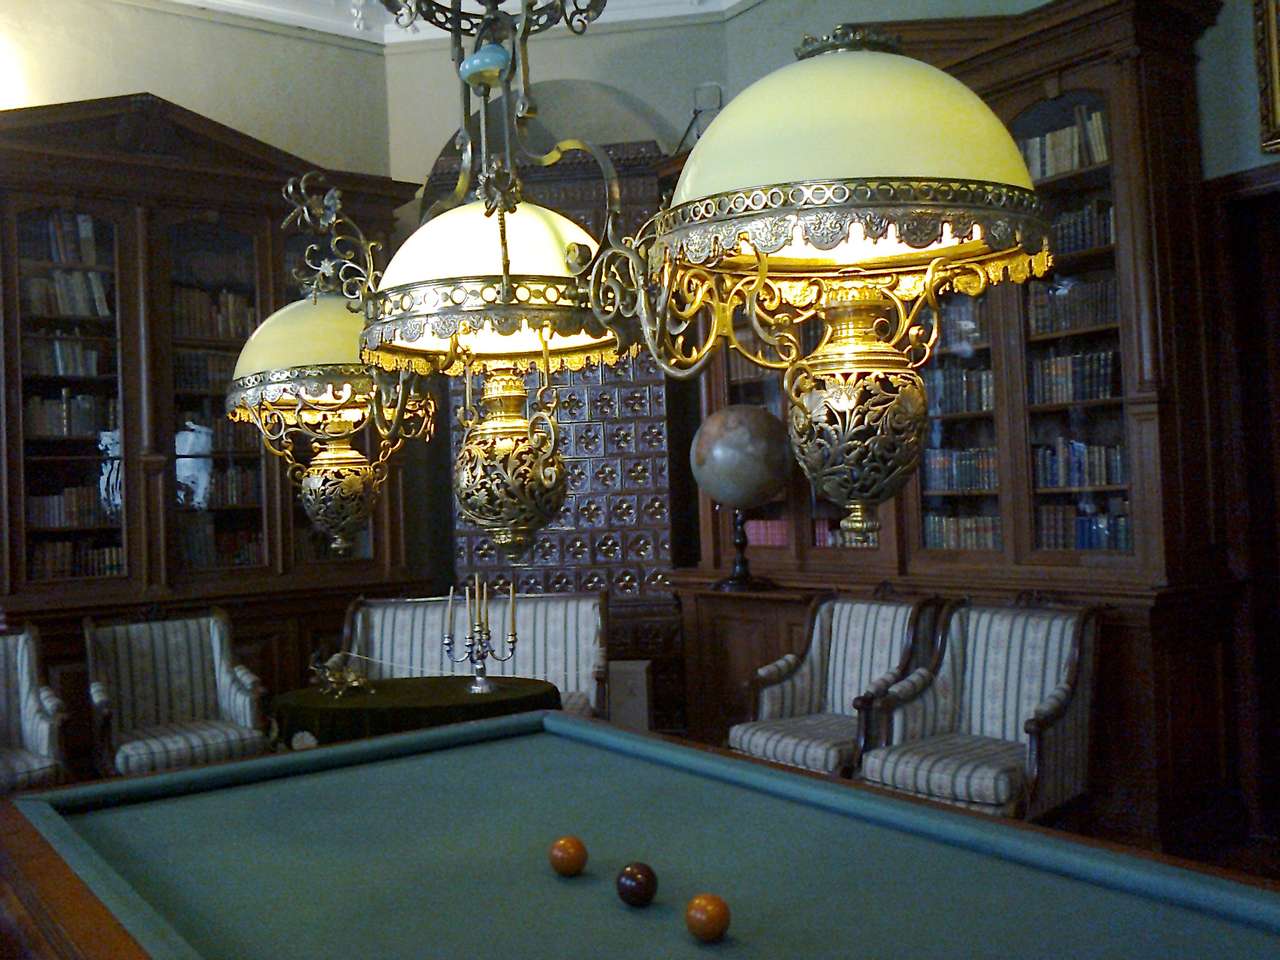 Billiard table in the library - Museum in Kozłówka puzzle online from photo